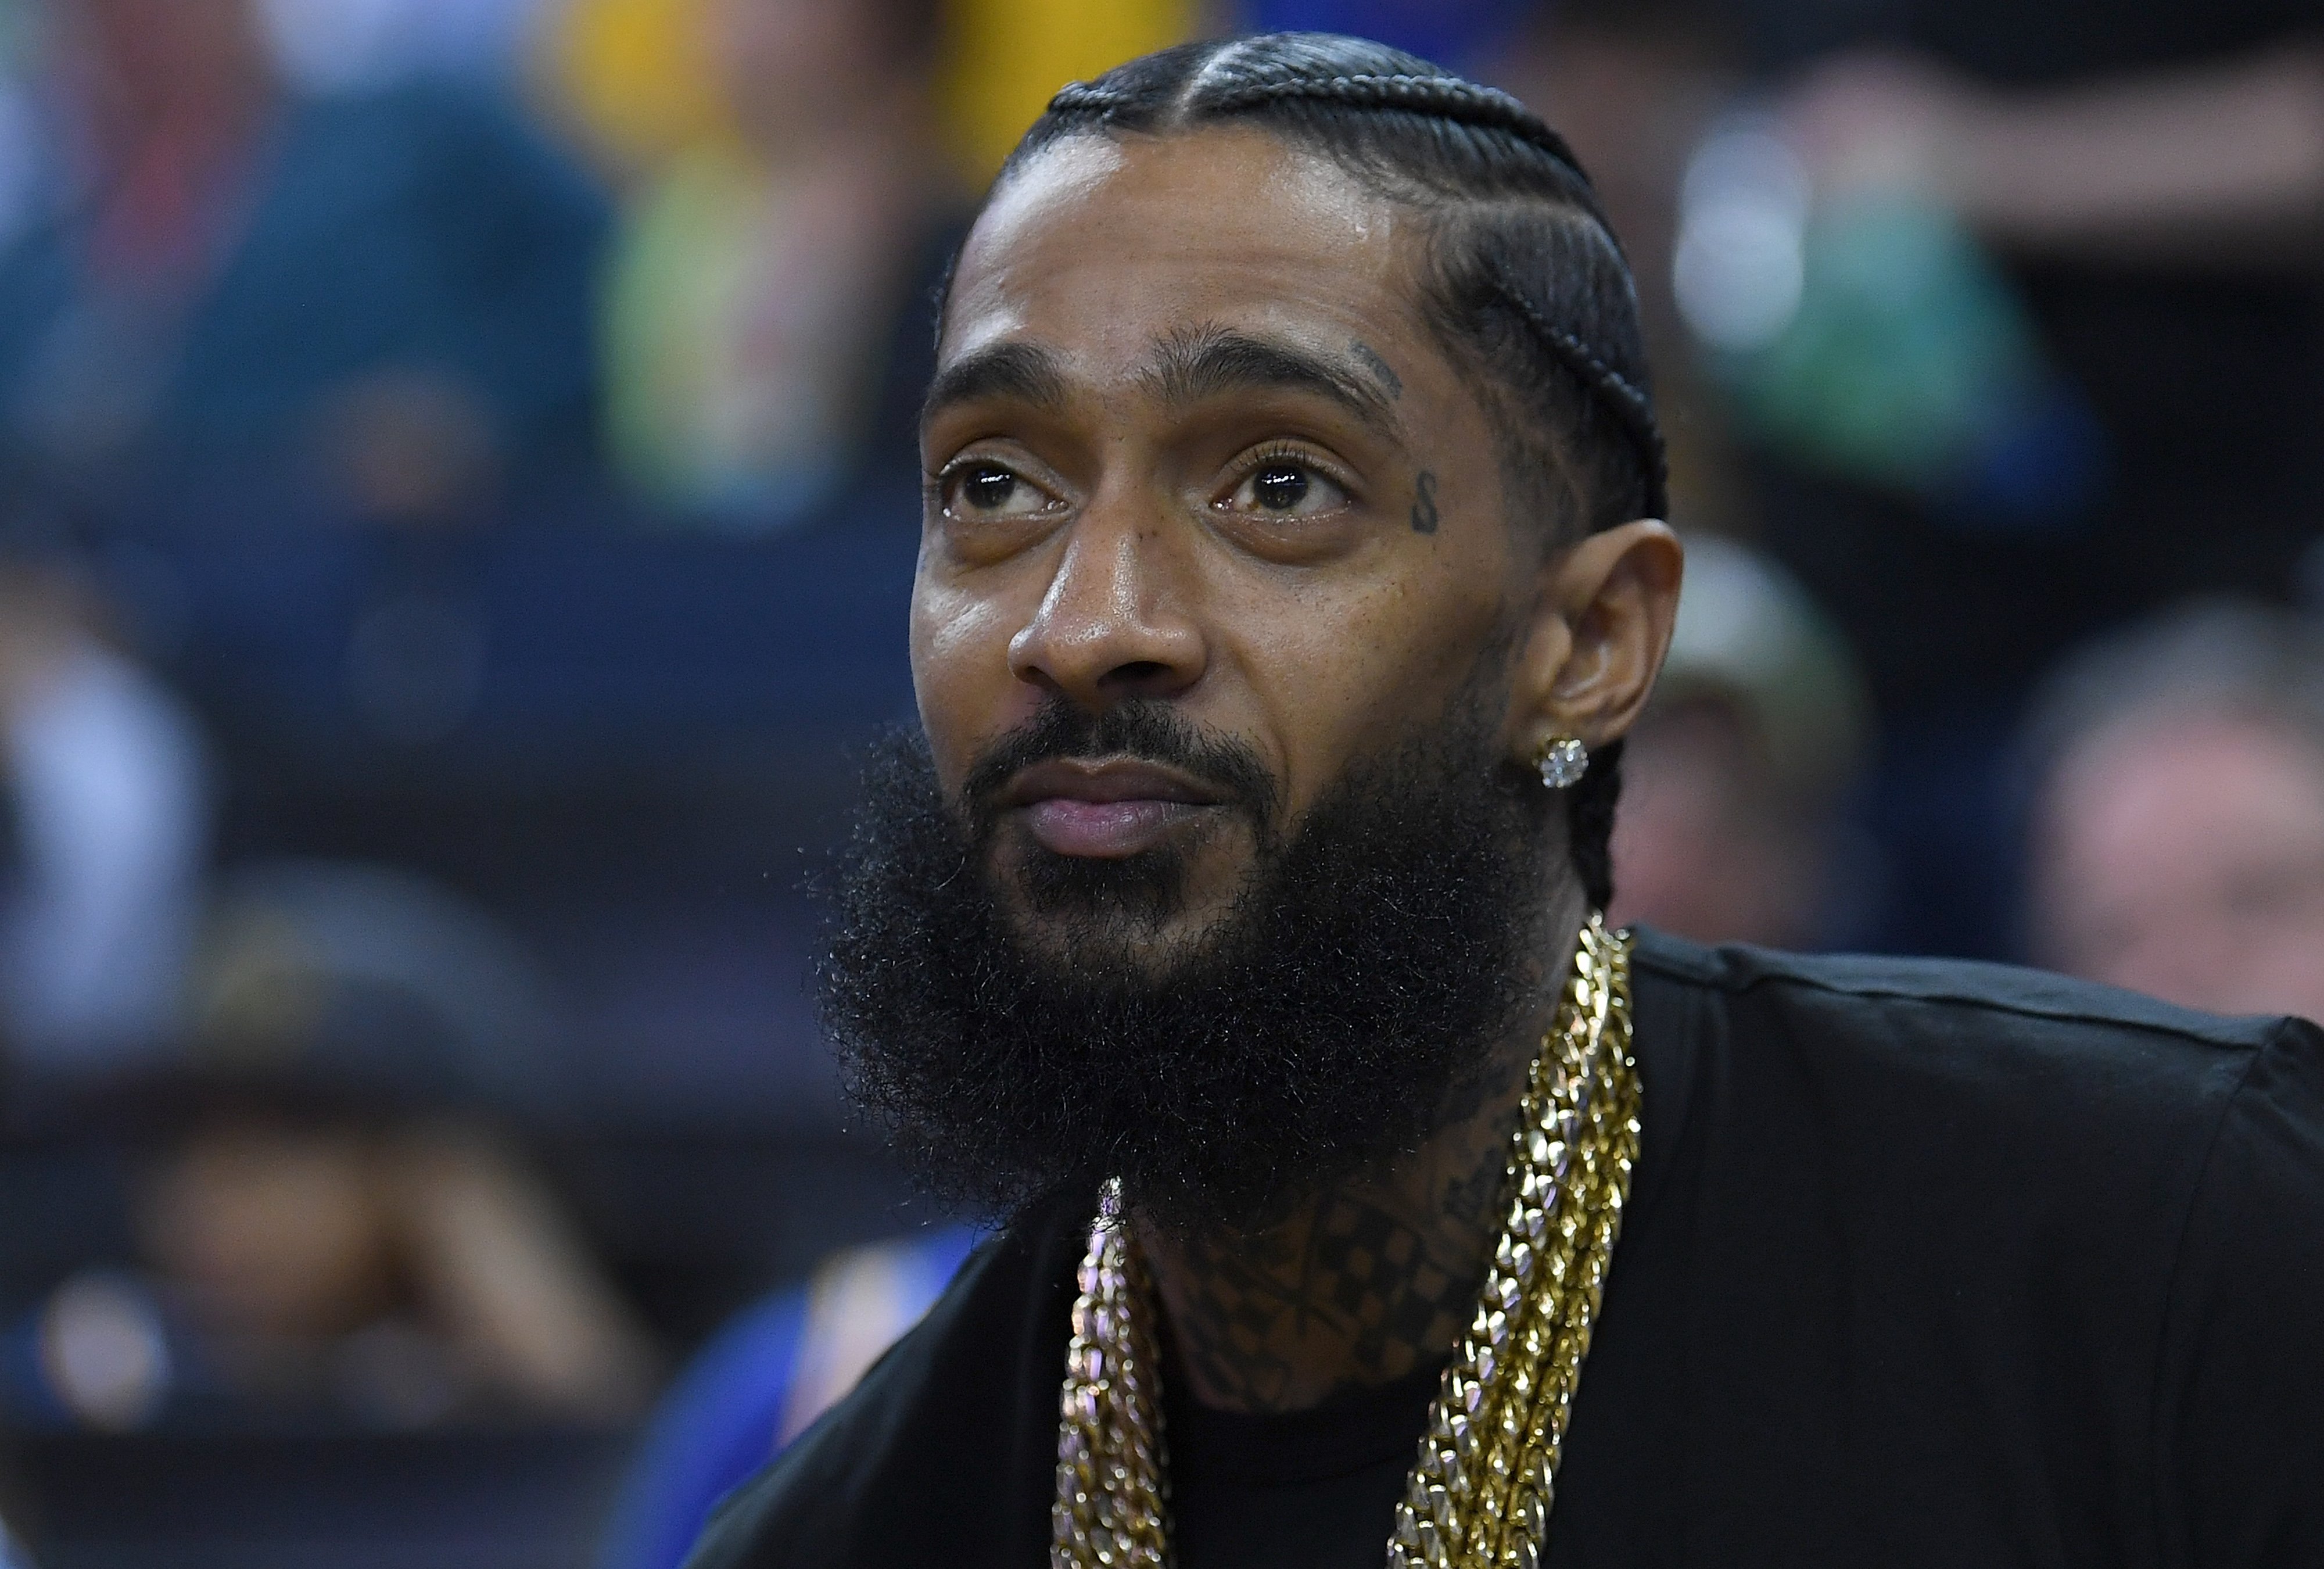 Nipsey Hussle at an NBA basketball game between the Milwaukee Bucks and Golden State Warriors at ORACLE Arena | Photo: Getty Images